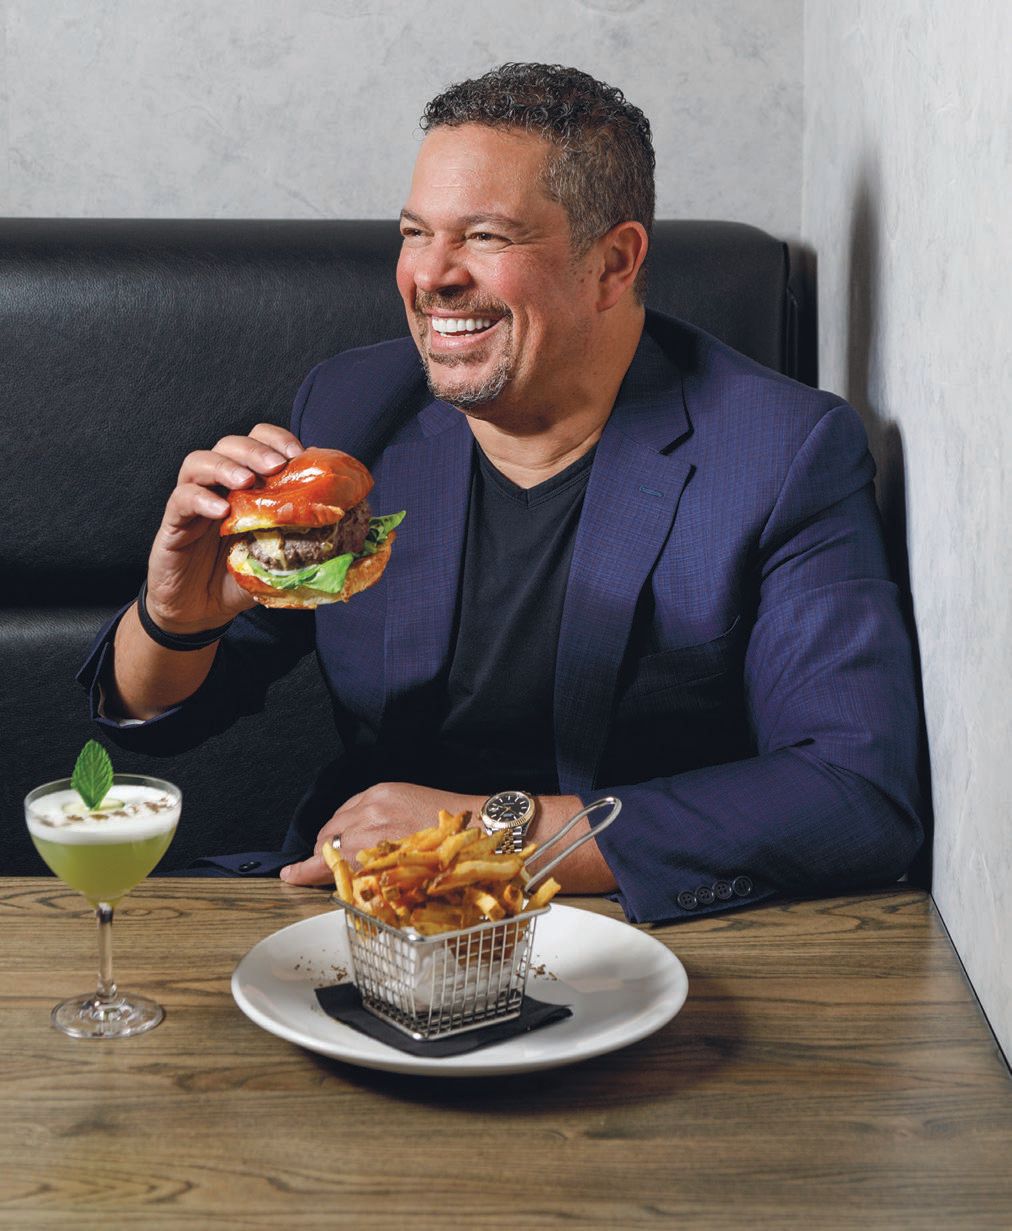 Kamel with the wagyu burger, french fries and Sun Tzu cocktail, which includes Winterville gin, lemon, lime, cucumber, mint, aquafaba and black pepper PHOTO BY PATRICK HEAGNEY